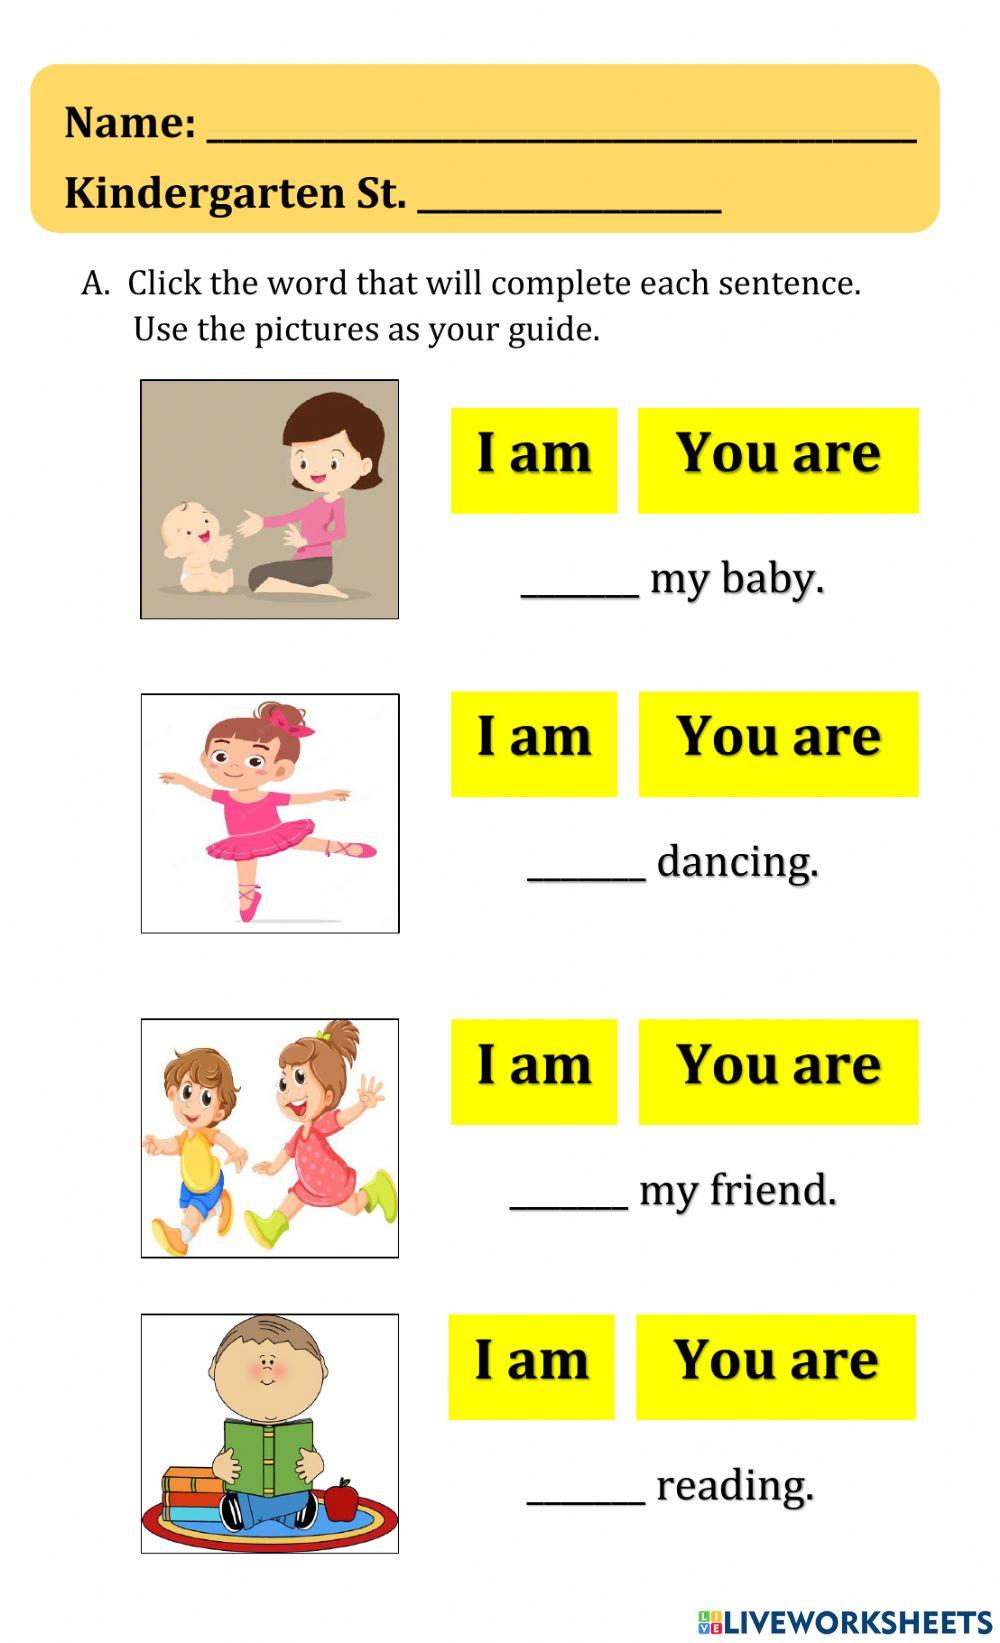 Using I am and You are